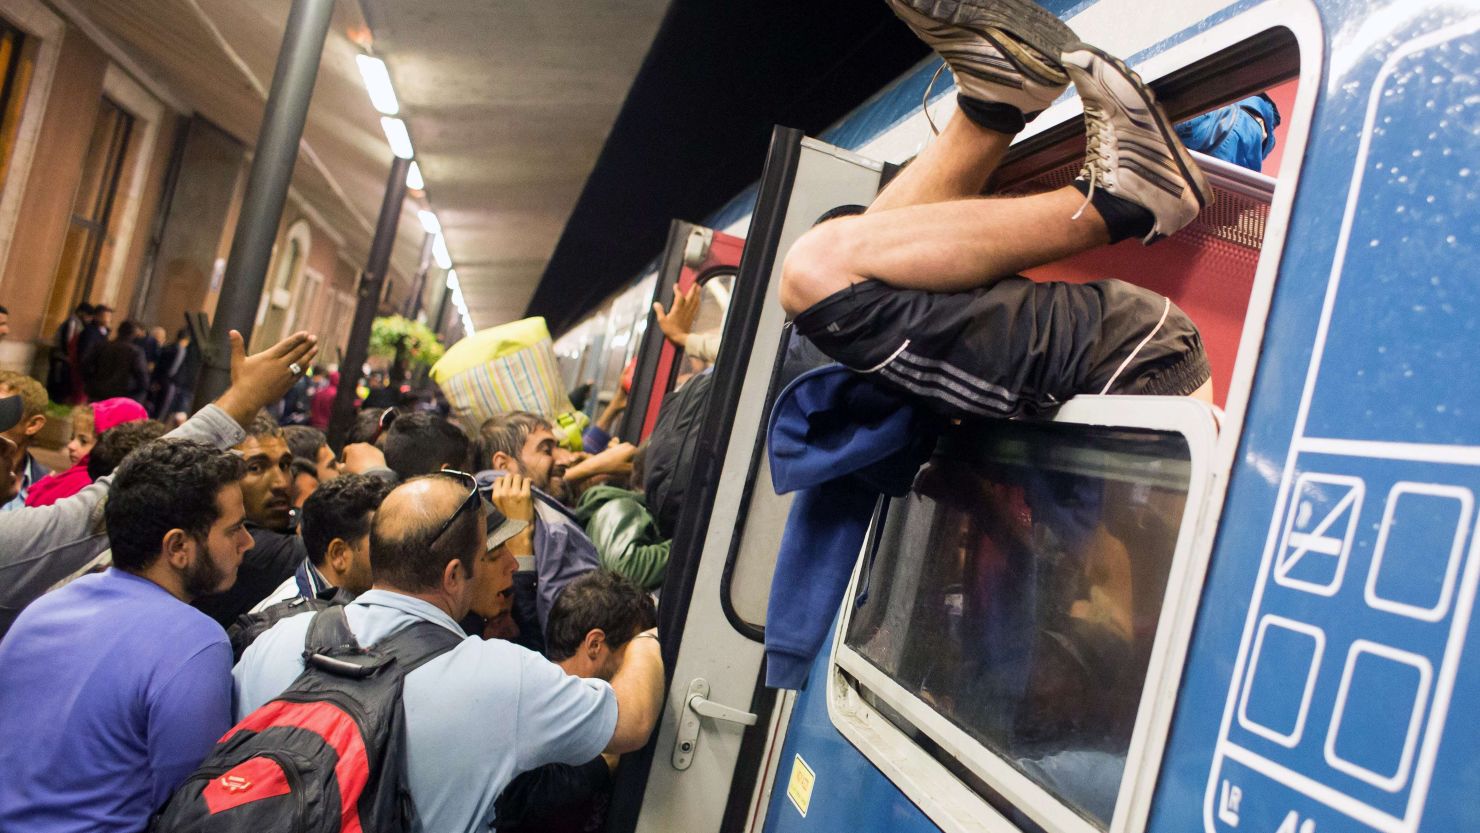 A man climbs through a window as migrants struggle to get on a train in Hungary in September 2015.